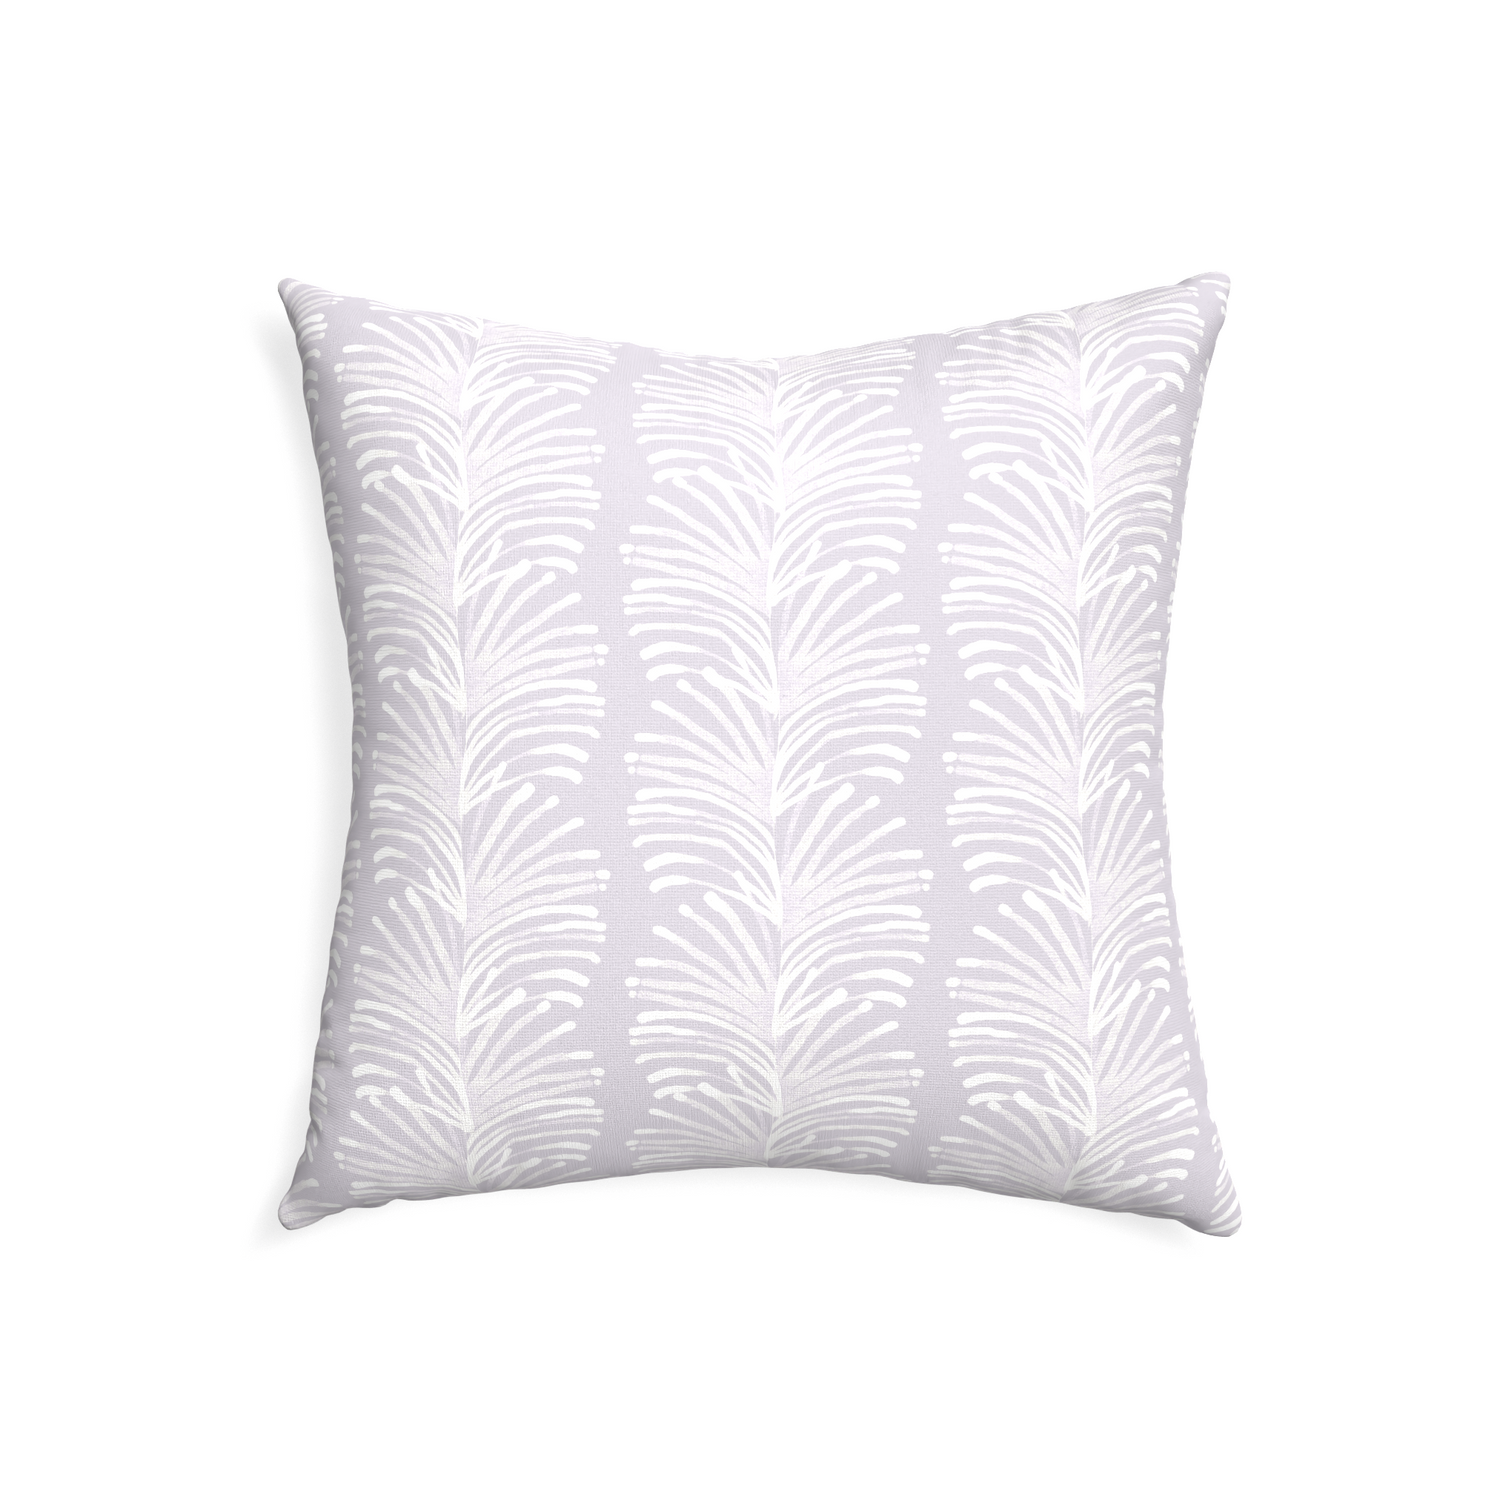 22-square emma lavender custom pillow with none on white background